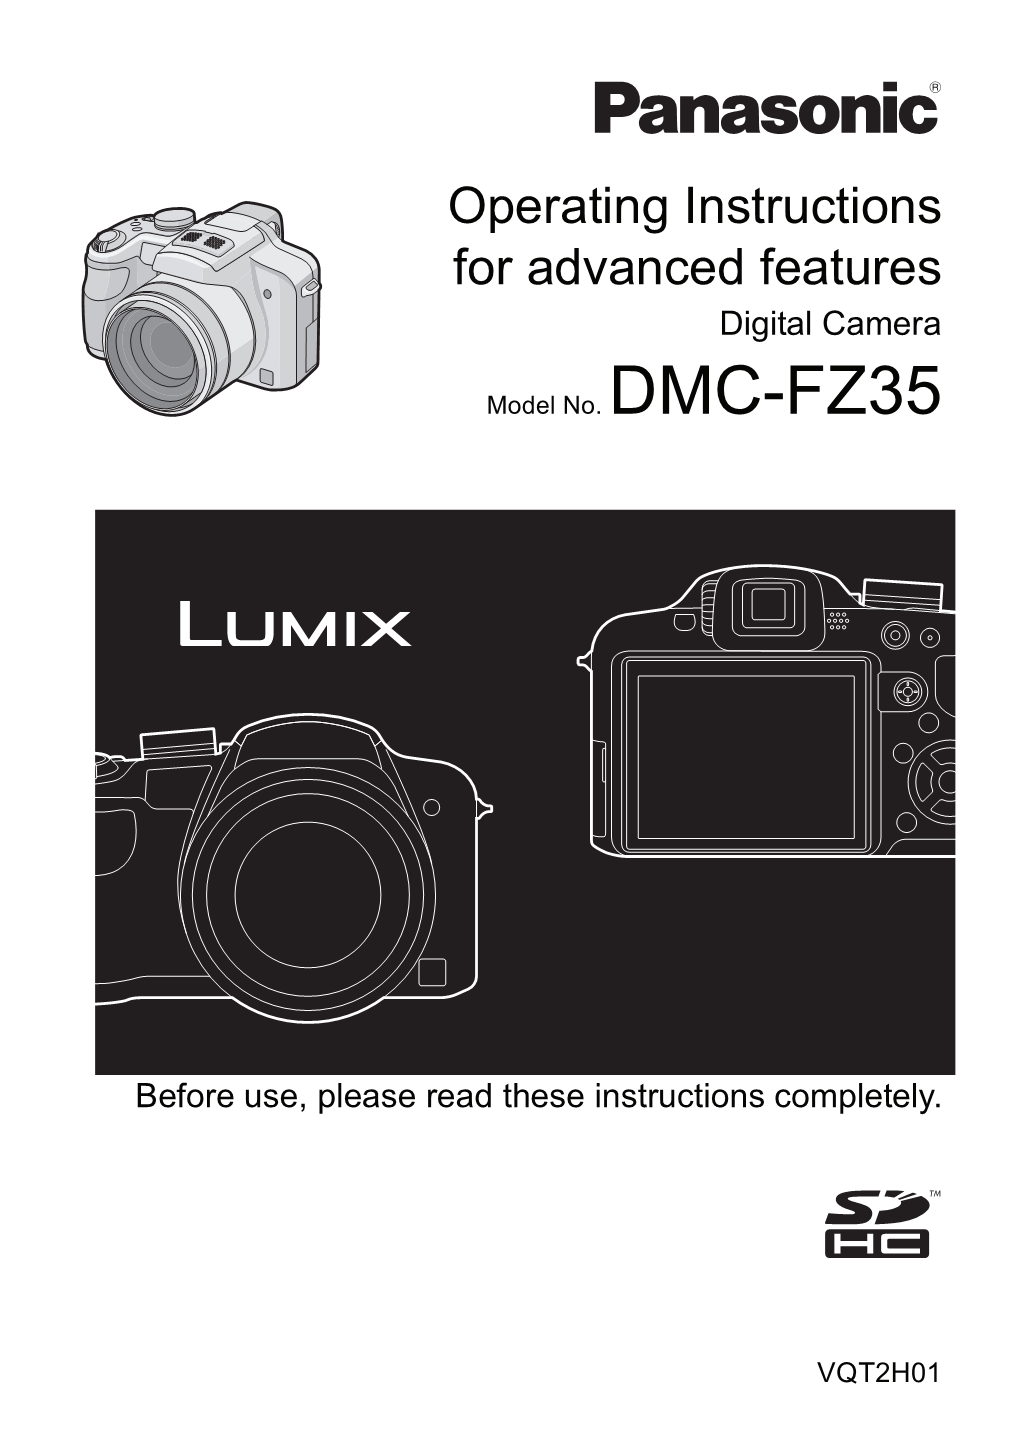 Operating Instructions for Advanced Features Digital Camera